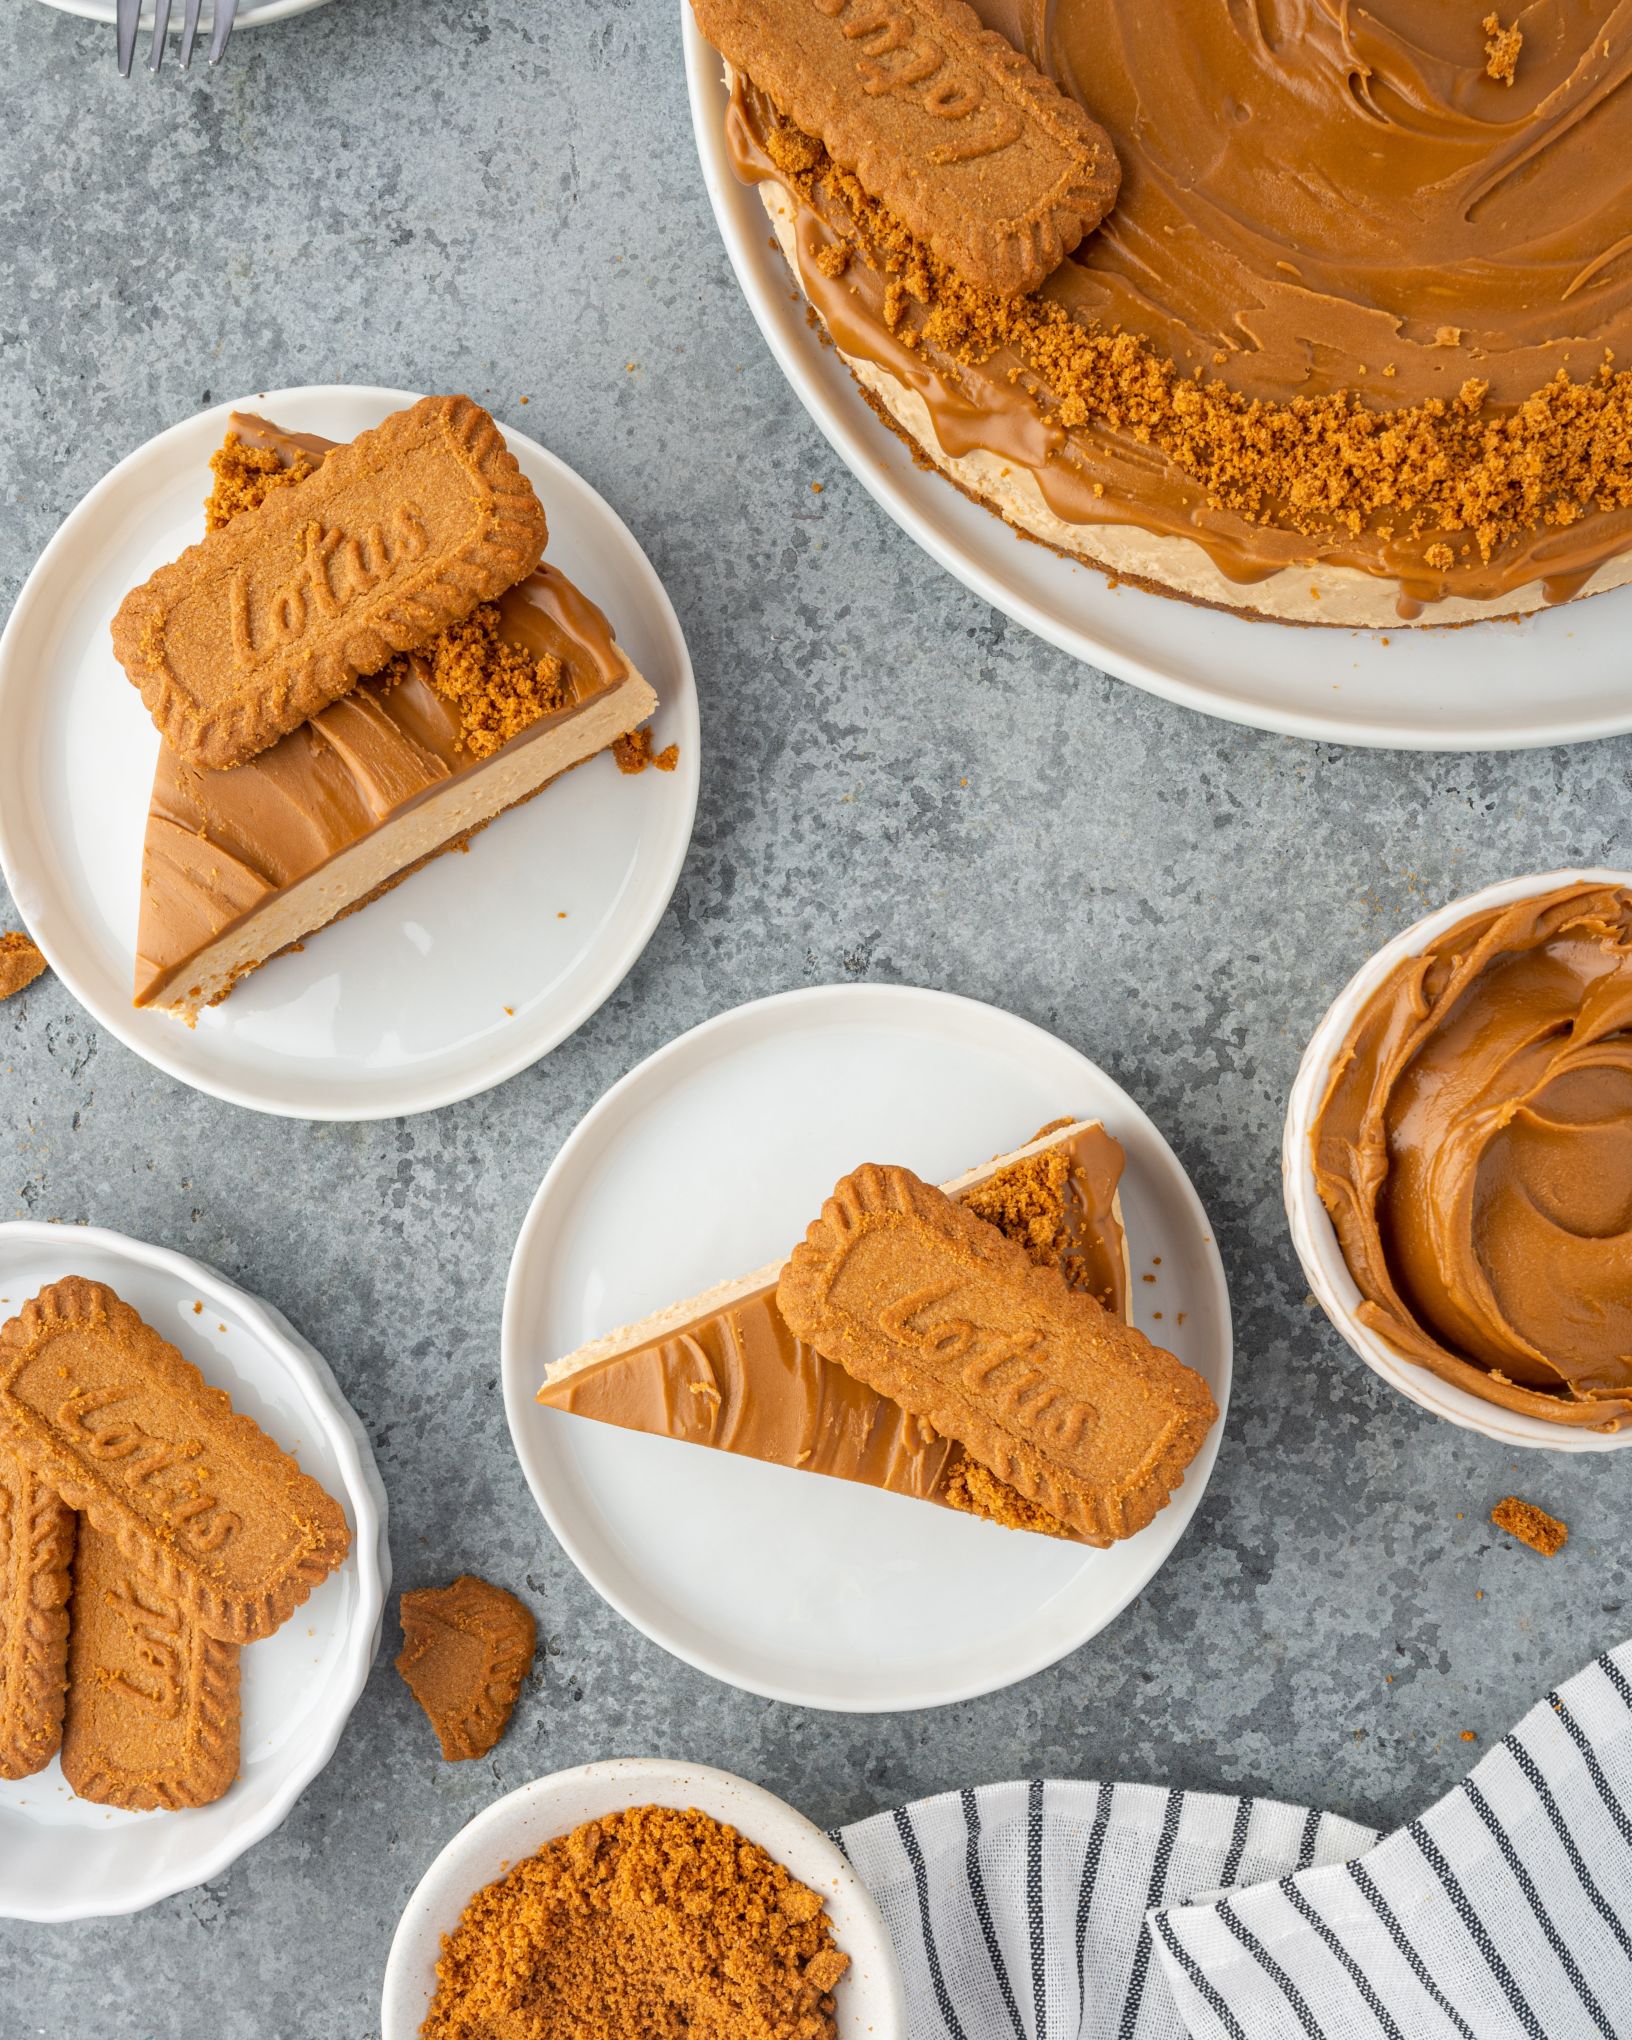 Slices of no bake cheesecake topped with Biscoff cookies on small plates.